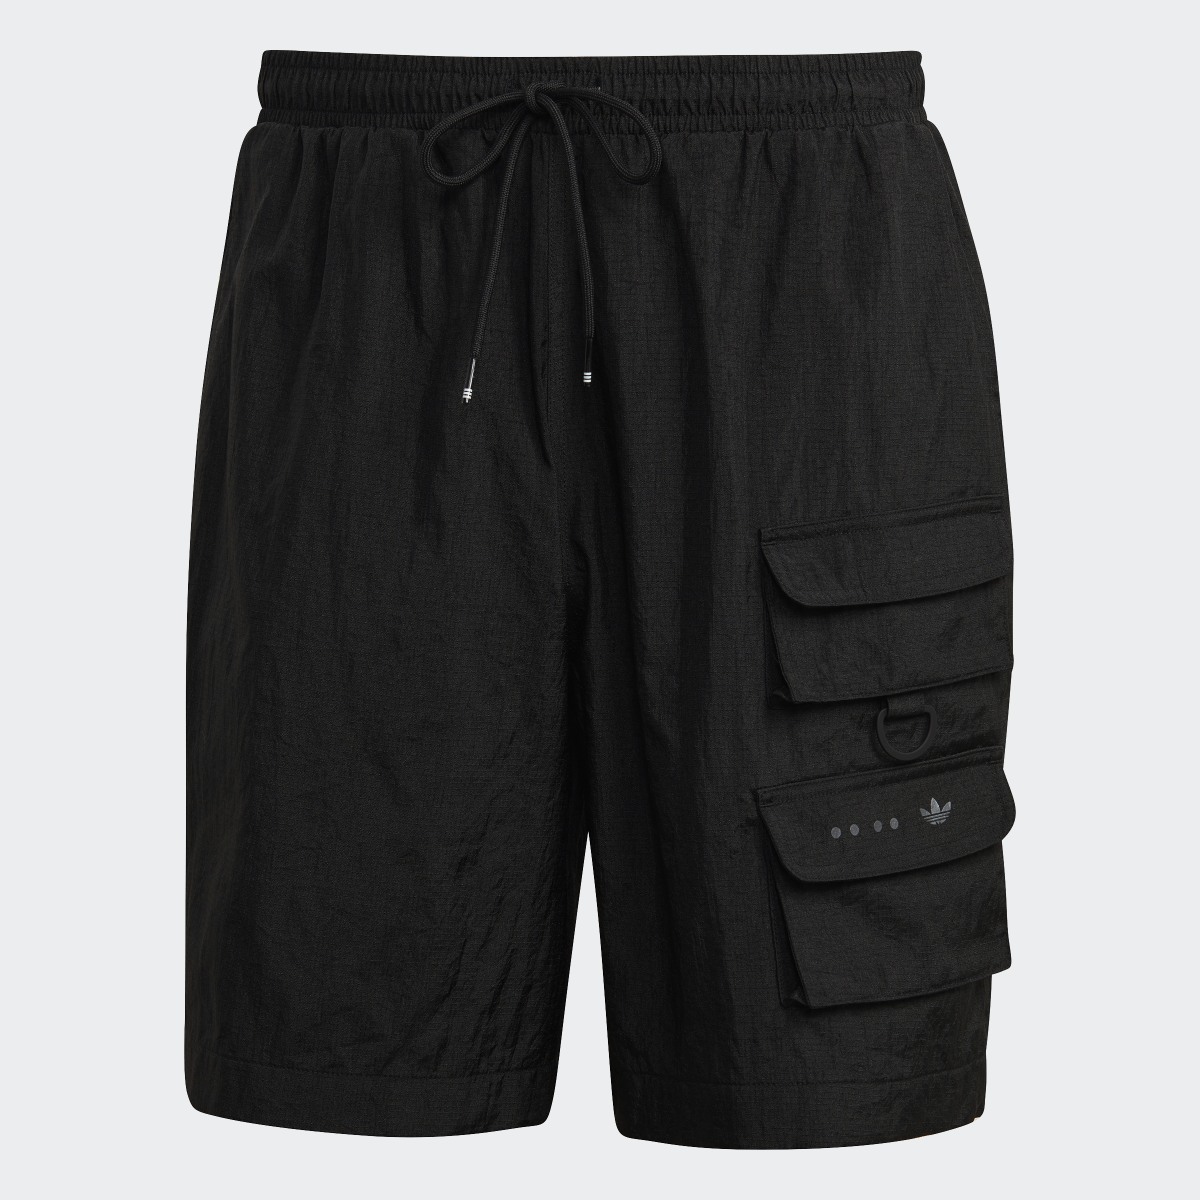 Adidas Reveal Material Mix Shorts. 4